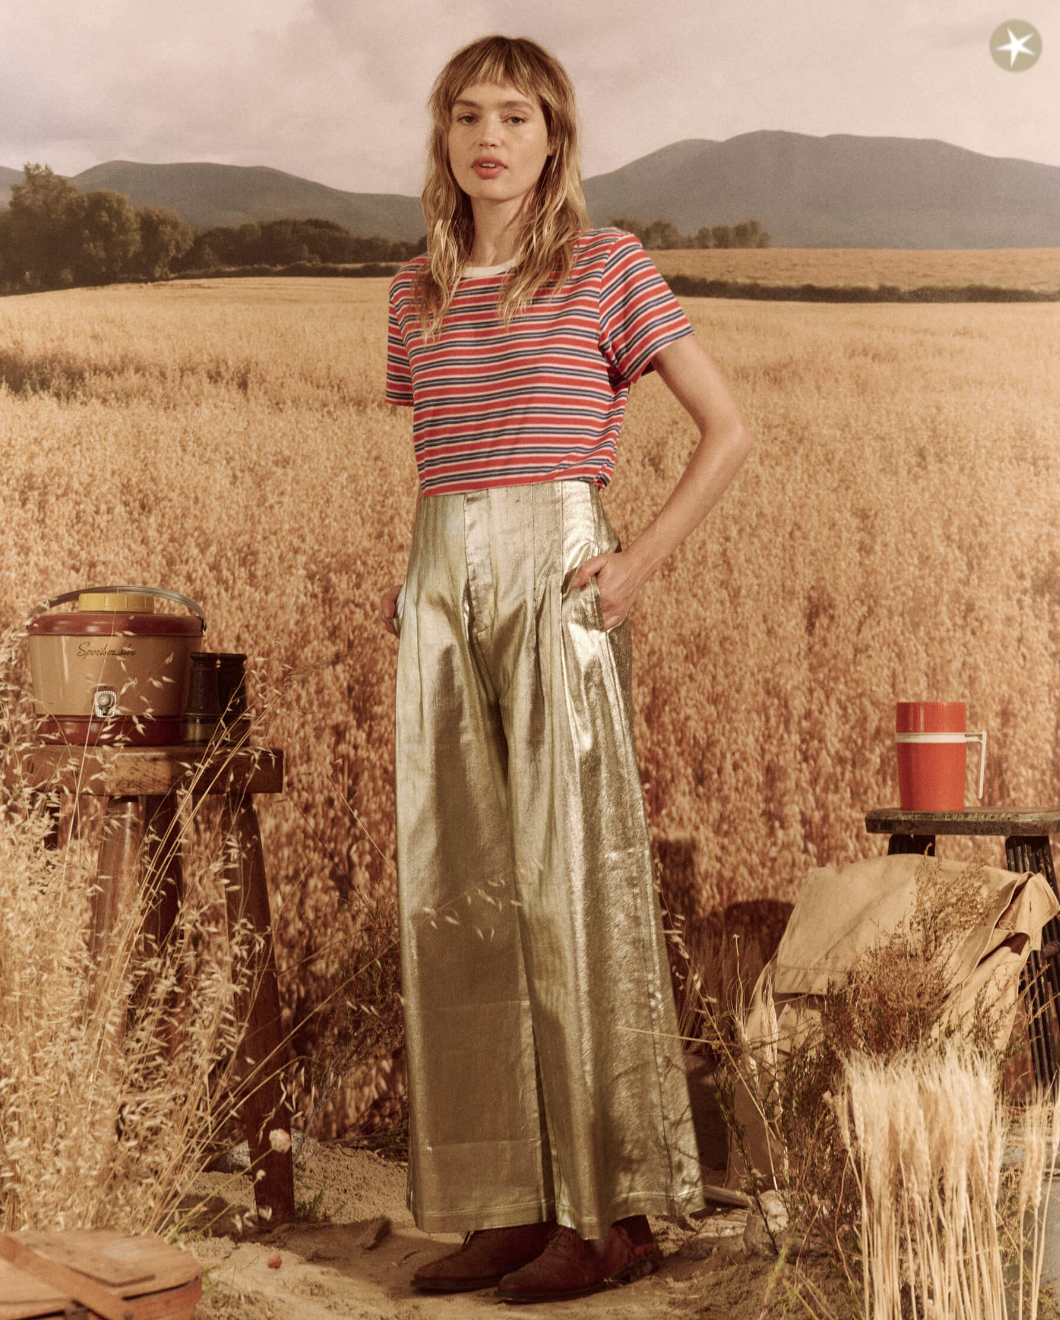 A woman stands in a wheat field wearing The Great Inc.&#39;s Sculpted Trousers, a red and blue striped T-shirt, and brown shoes. A rustic barrel and can are visible in the background under a cloudy sky, adding to the Arizona-style ambiance.